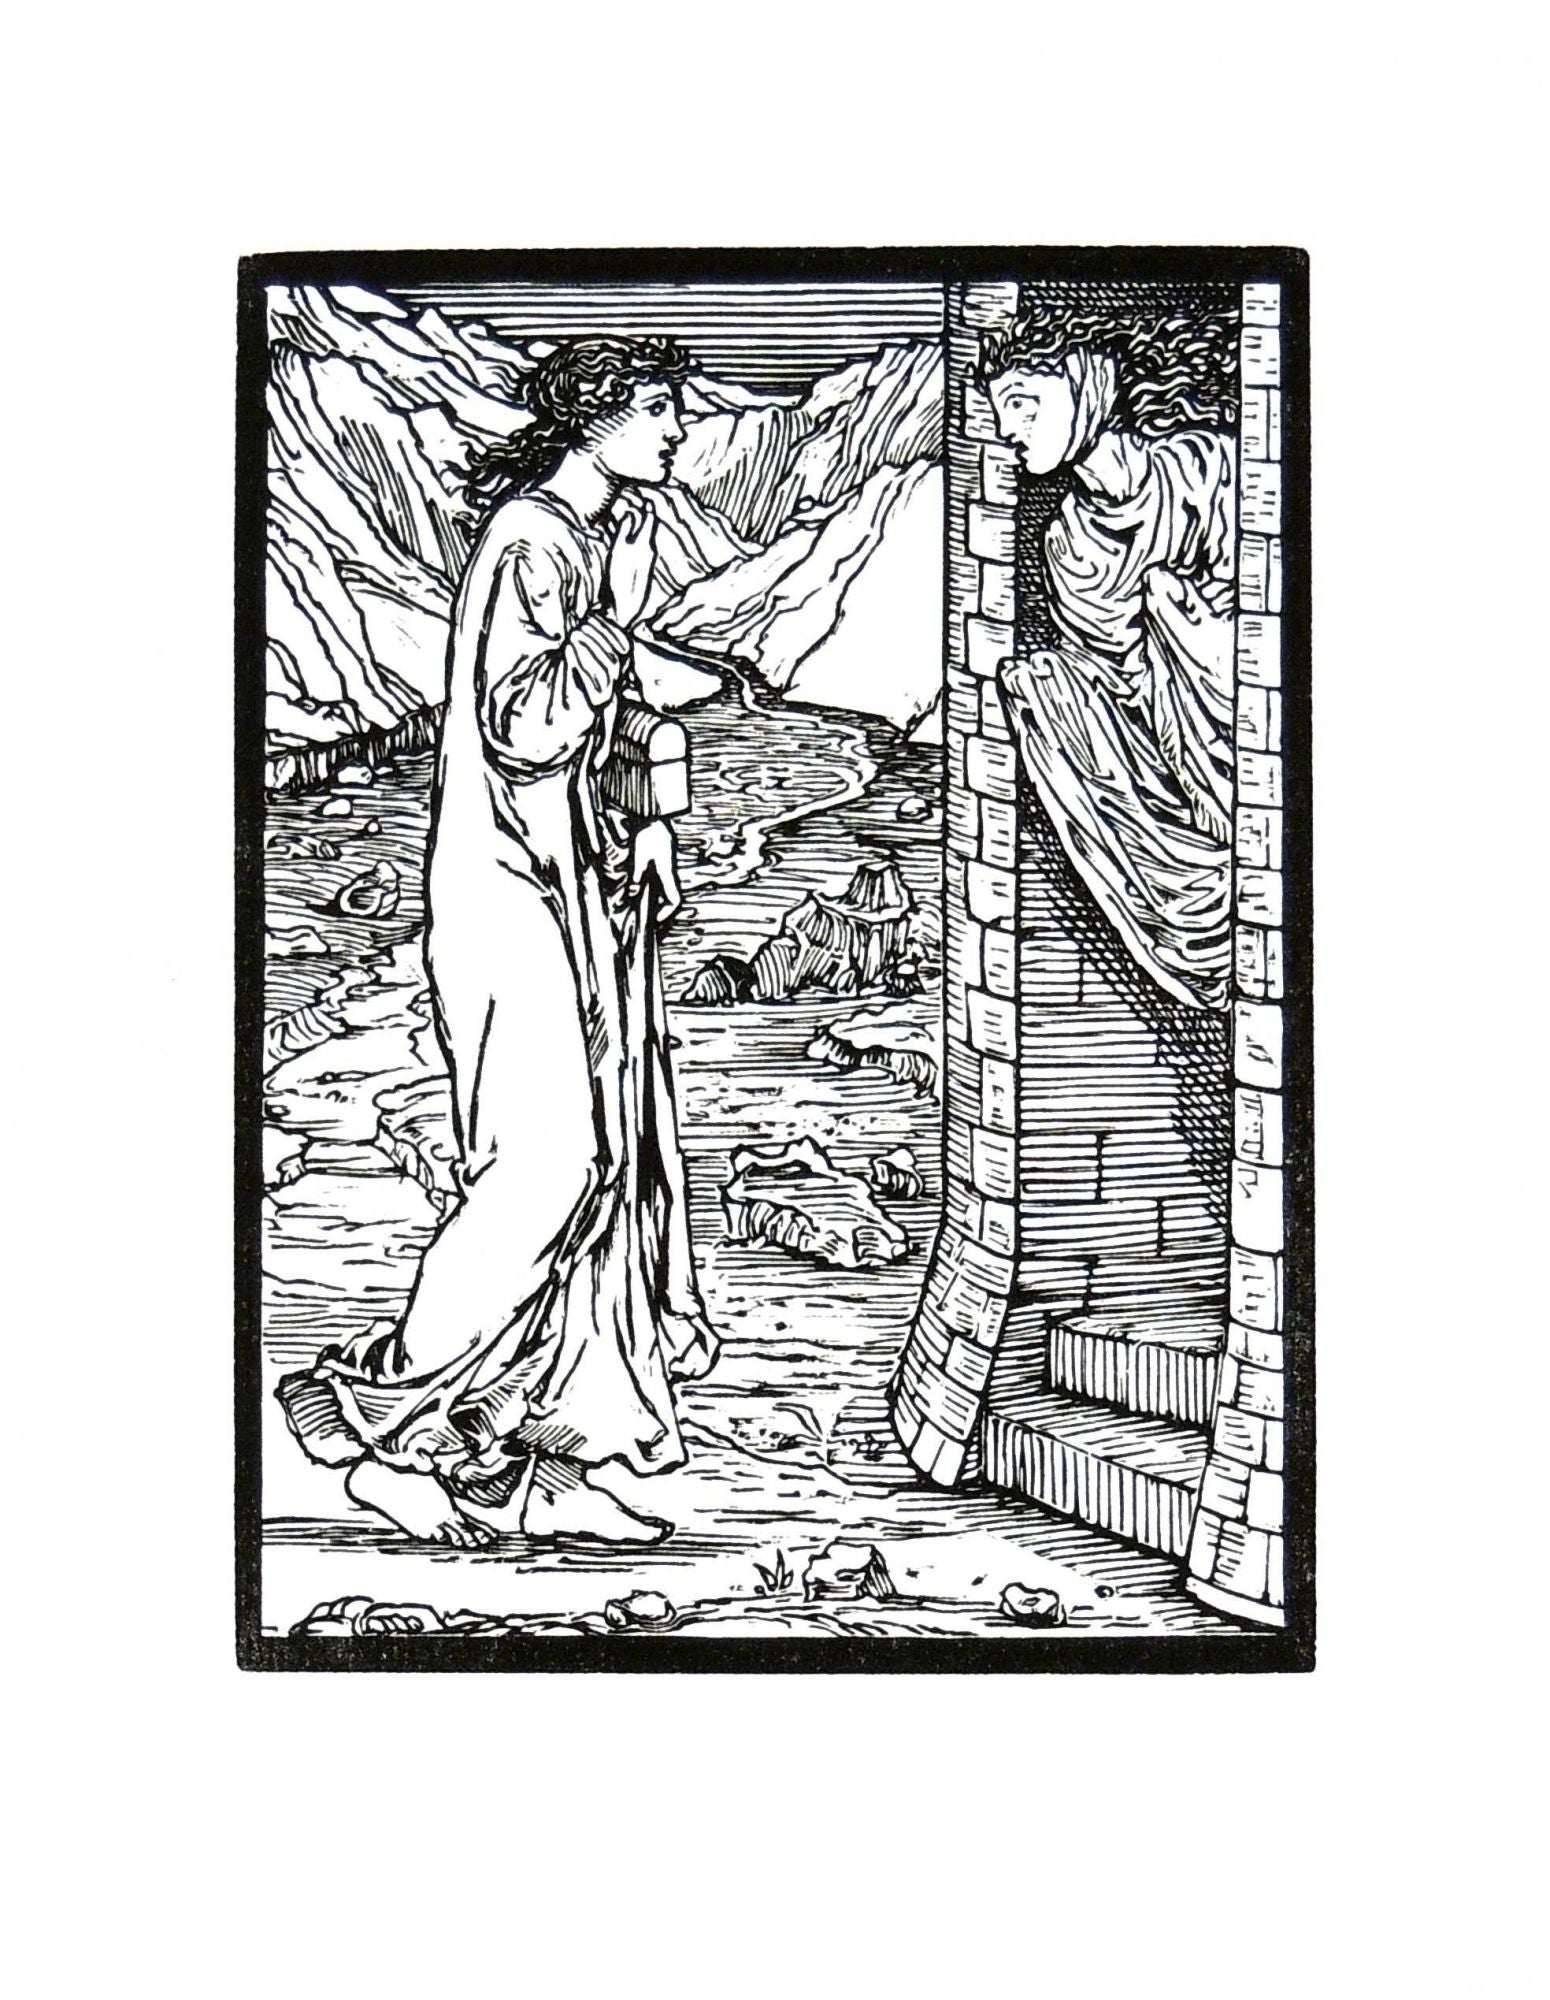 The Story of Cupid and Psyche: The Speaking Tower. PRINT by William Morris,  Edward Burne-Jones on The Kelmscott Bookshop